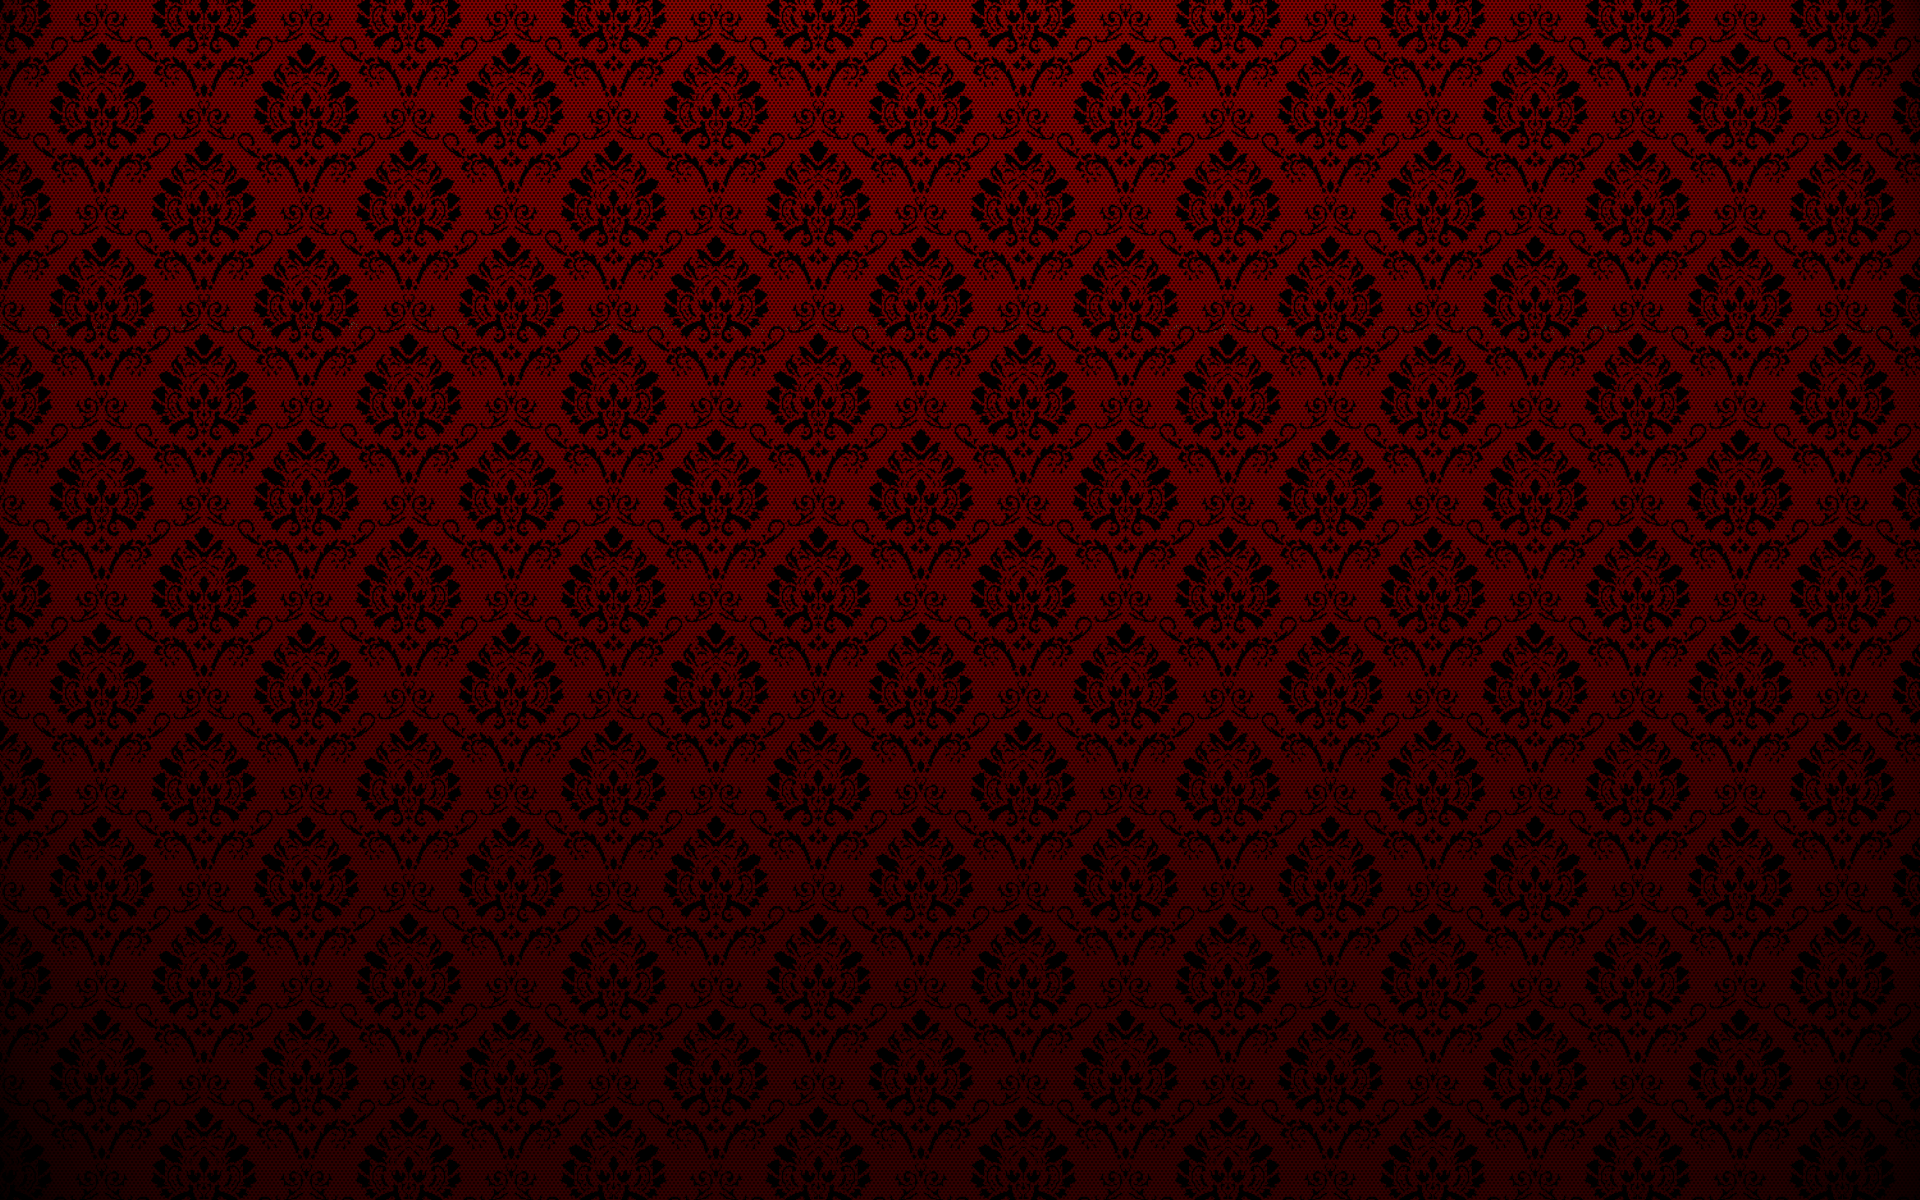 Wallpaper Texture Red Paper Media Details. background red